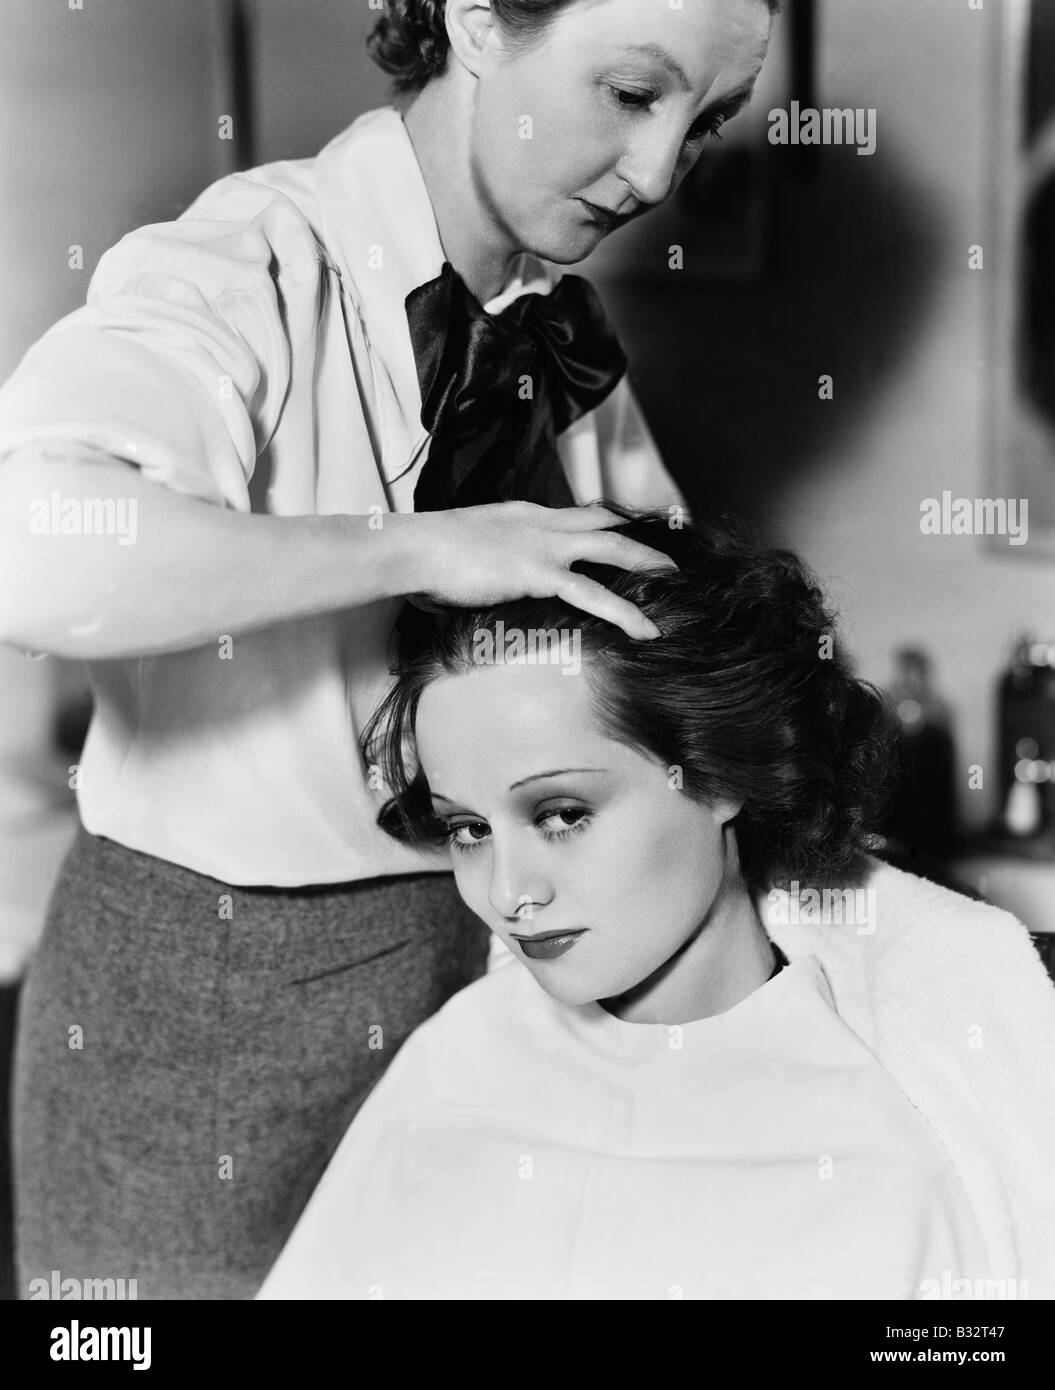 Young woman getting her hair done in a hair salon Stock Photo